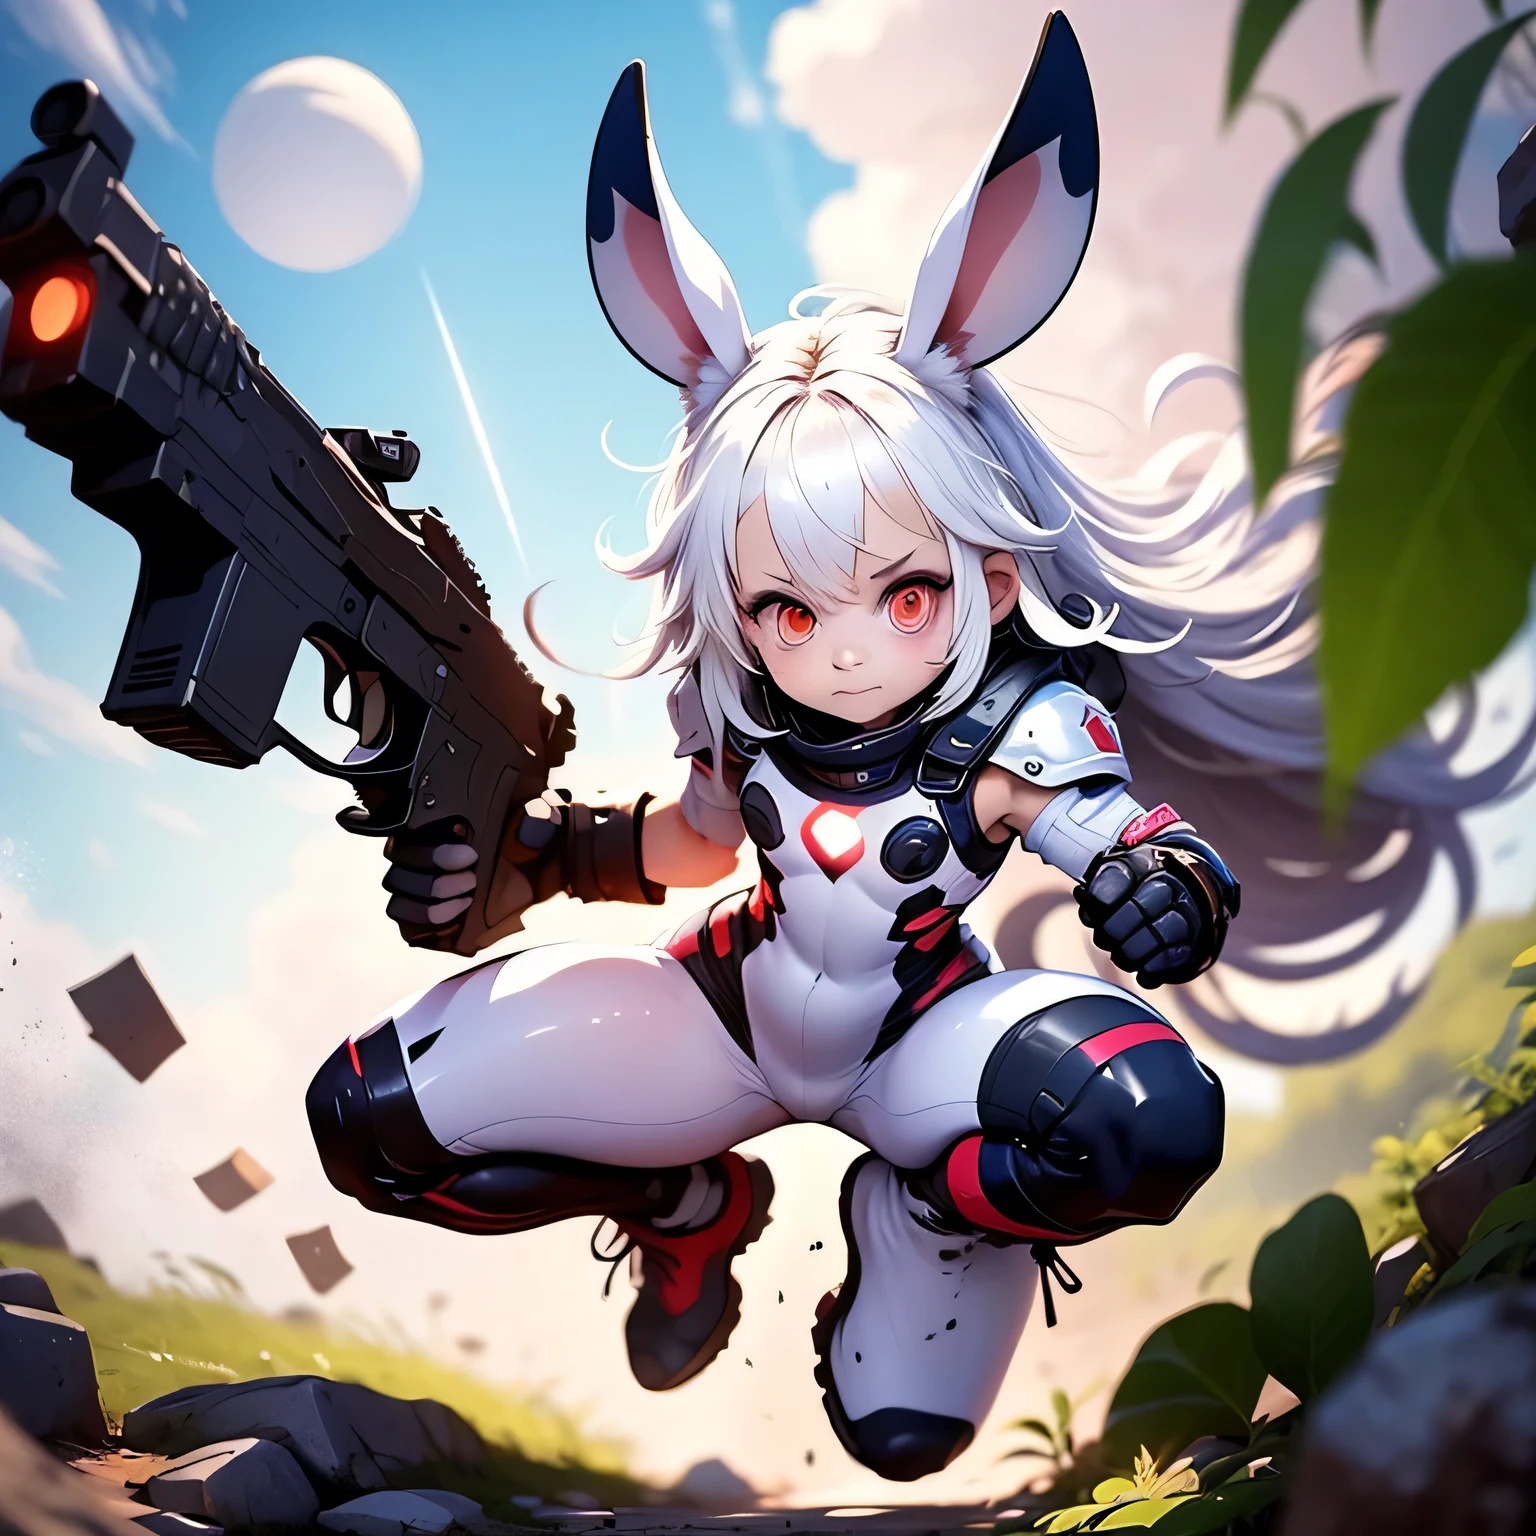 solo,1female\(chibi,cute,kawaii,small kid,(white hair:1.7),(very long hair:1.7),bangs,(ear\(fluffy white rabbit-ear\):1.3),(red eye),big eye,beautiful shiny eye,skin color white,big hairbow,(combat suit\((bodysuit:1.5),(skin tight:1.5),body suit,(very tight:1.5),weapons\)),(breast:1.3),fighting stance,dynamic pose,shooting and aiming a laser gun to viewer\), BREAK ,background\(in the sky\), BREAK ,quality\(8k,wallpaper of extremely detailed CG unit, ​masterpiece,hight resolution,top-quality,top-quality real texture skin,hyper realisitic,increase the resolution,RAW photos,best qualtiy,highly detailed,the wallpaper,golden ratio\),dynamic angle,better hands,[nsfw:2.0]